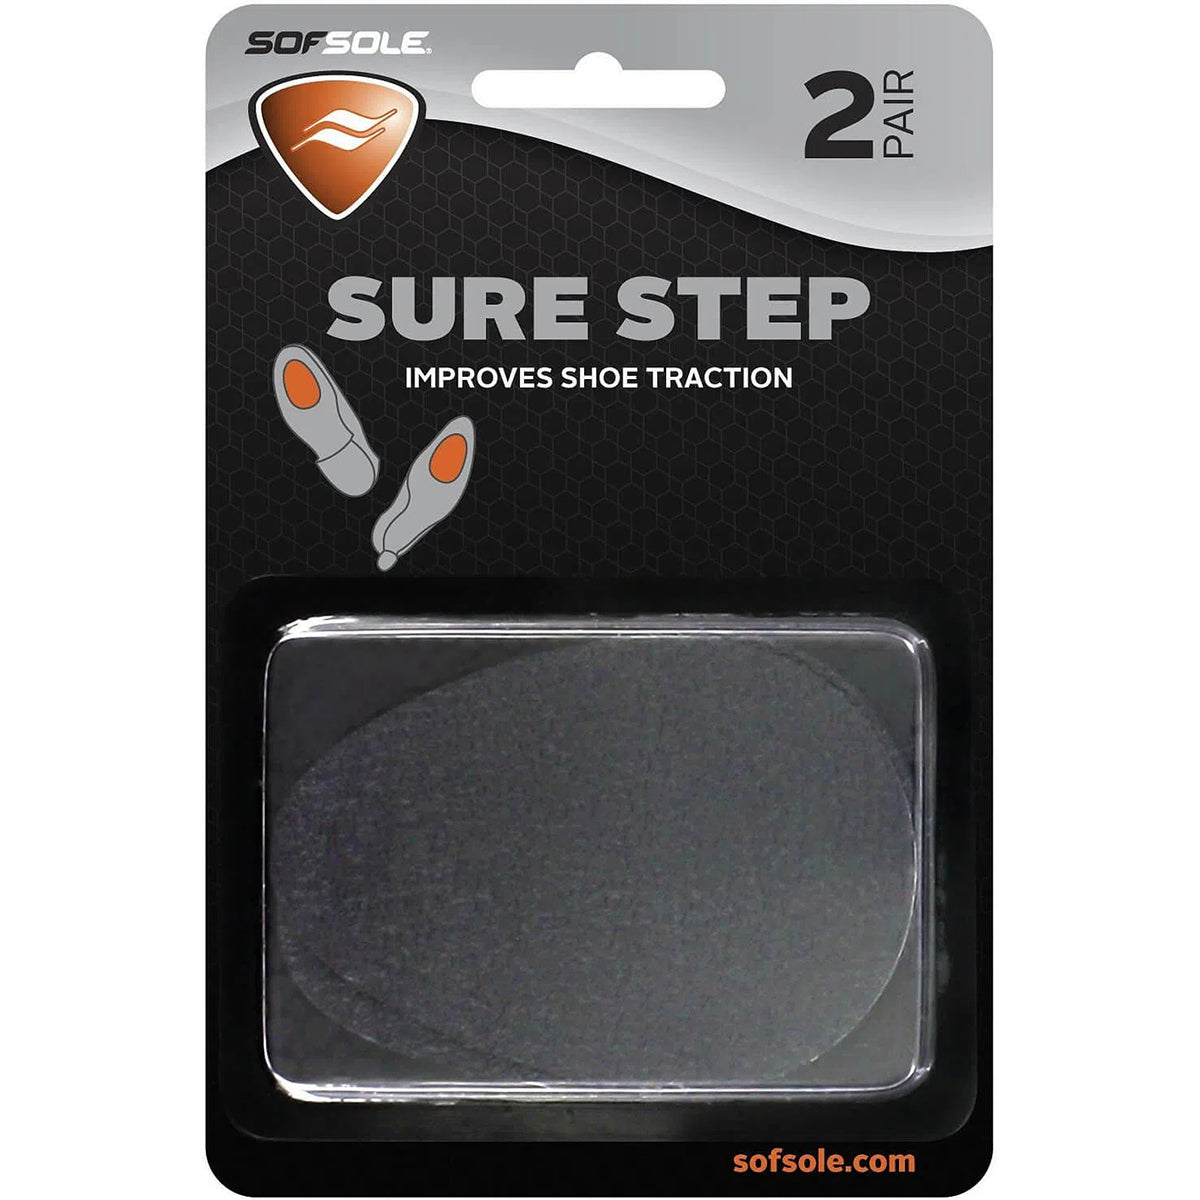 Sof Sole Sure Step Shoe Insoles 2-Pack - Black SofSole